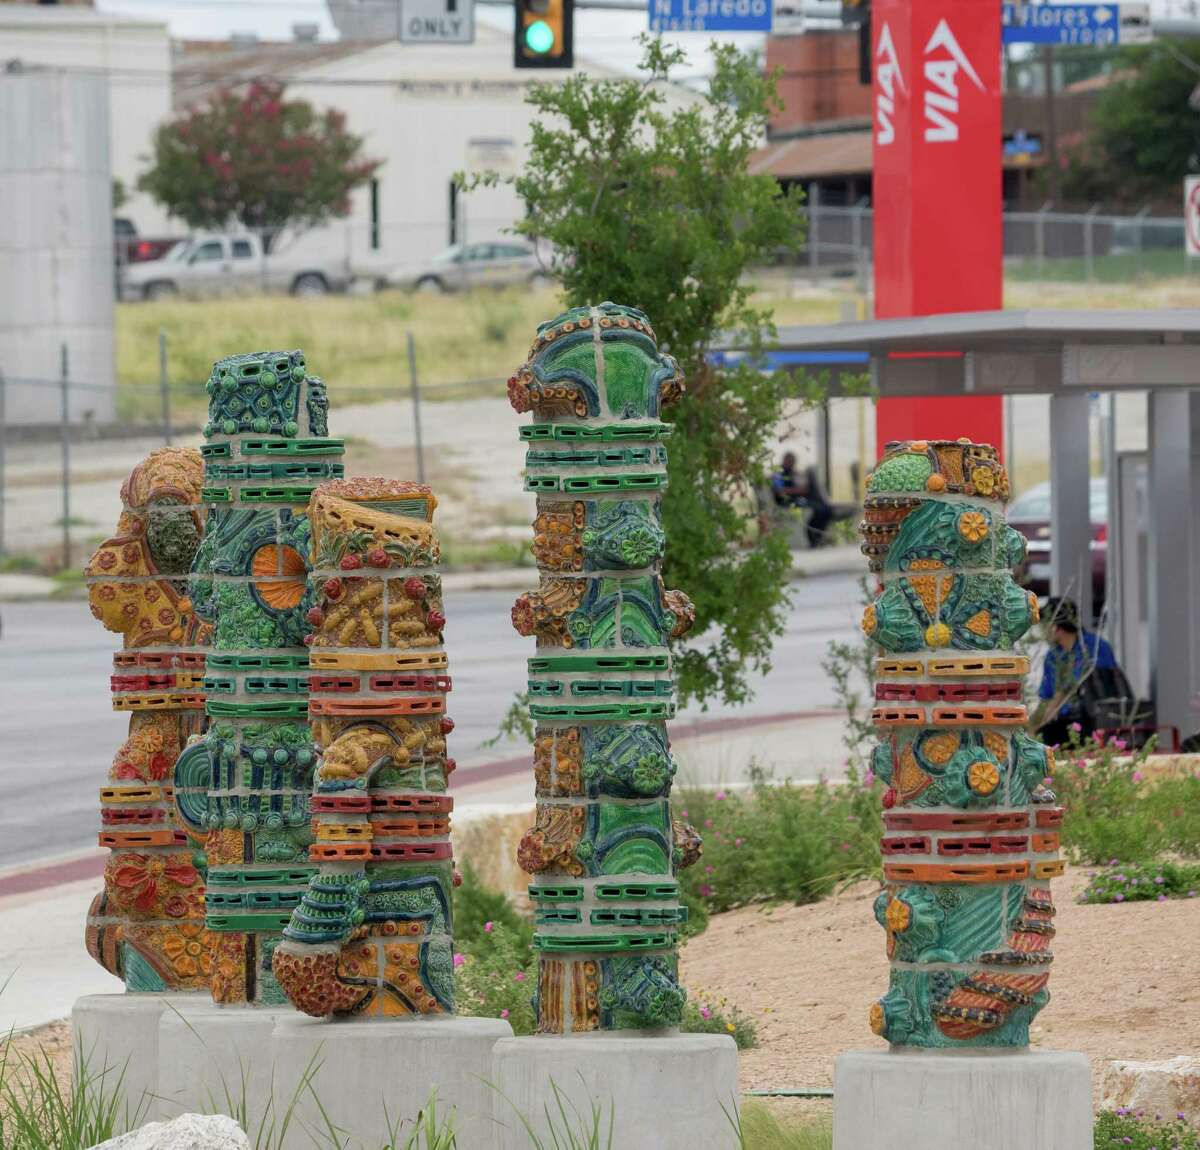 "The Guardians of Five Points," a new public art project by Diana Kersey, is located at the Five Points Transfer Area at 106 E. Fredericksburg Road.